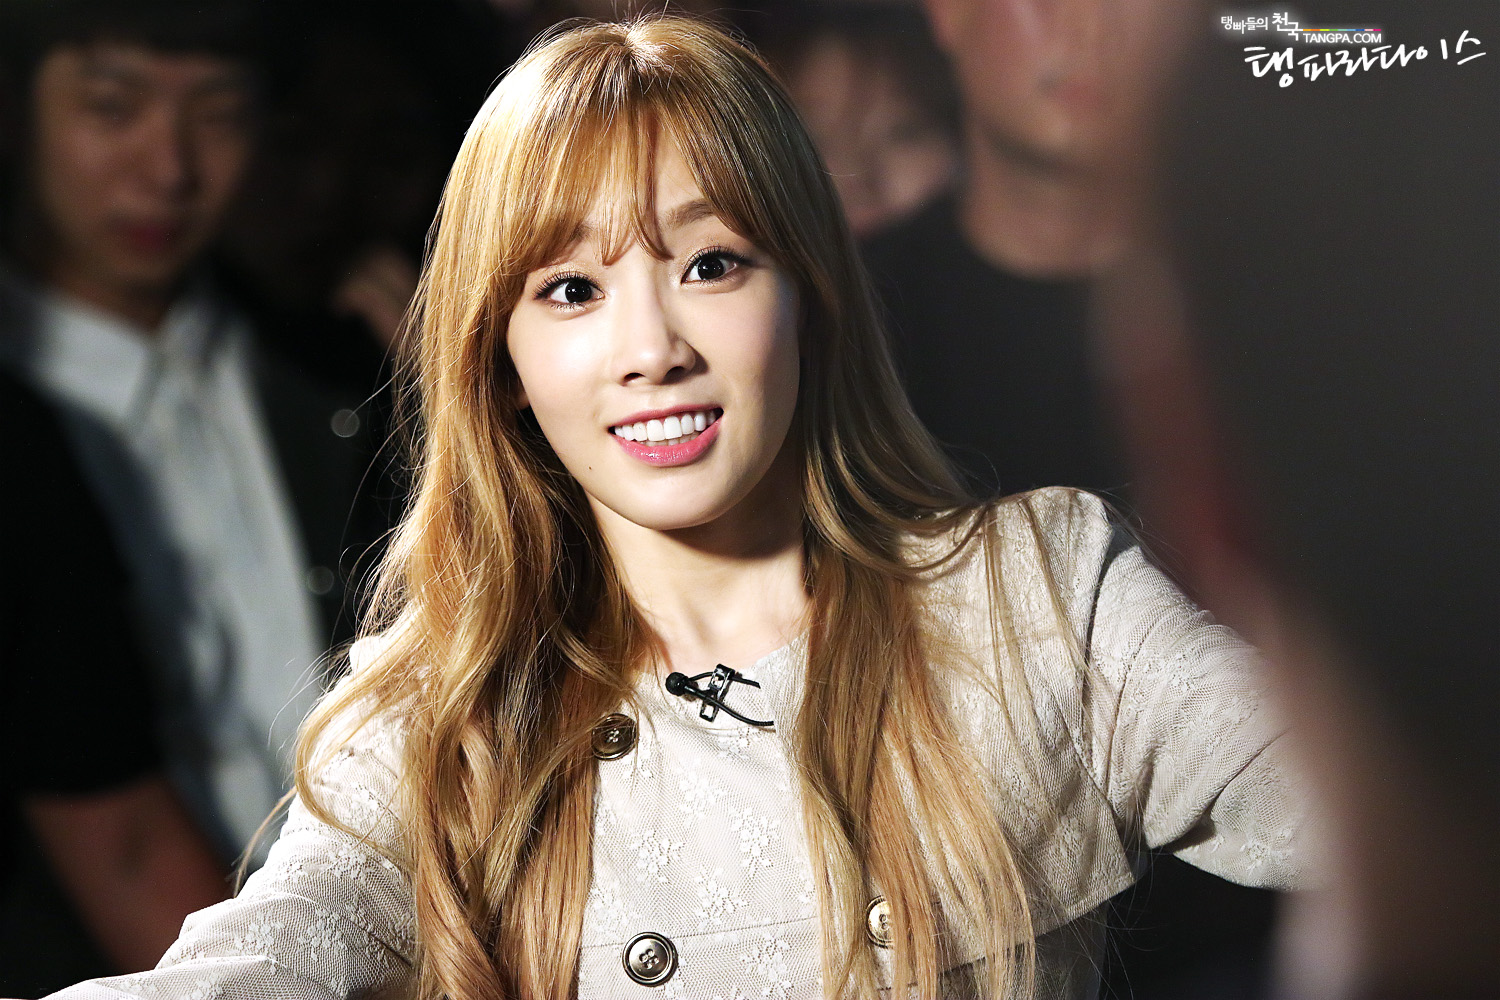 Taeyeon FanPhoto @ 140926 Guerrilla Dating by 탱파, persisNayeon